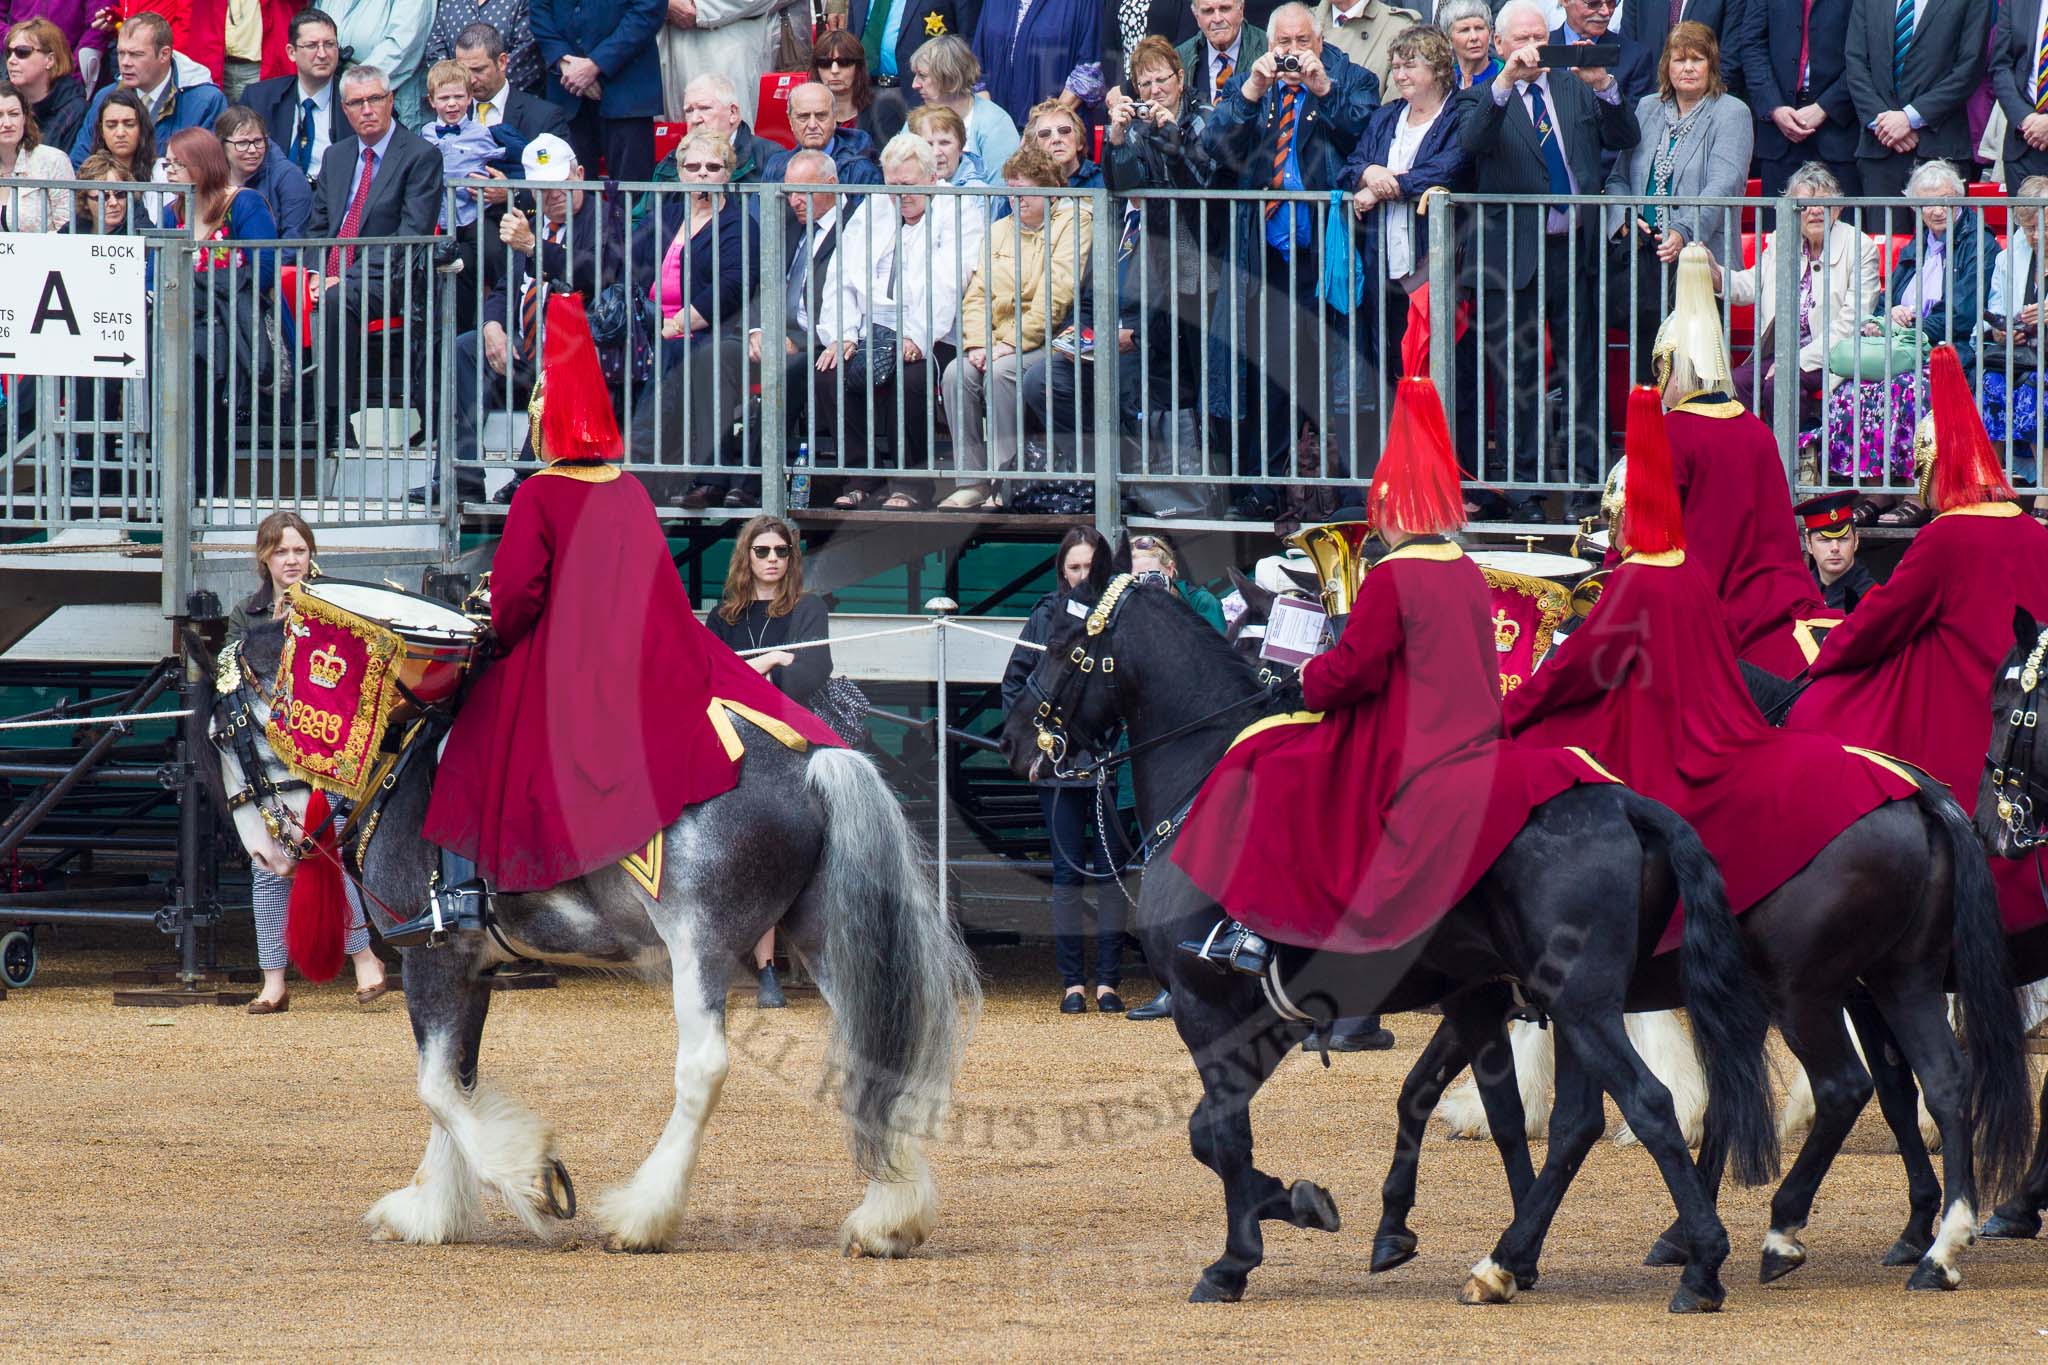 The Colonel's Review 2014.
Horse Guards Parade, Westminster,
London,

United Kingdom,
on 07 June 2014 at 12:02, image #694